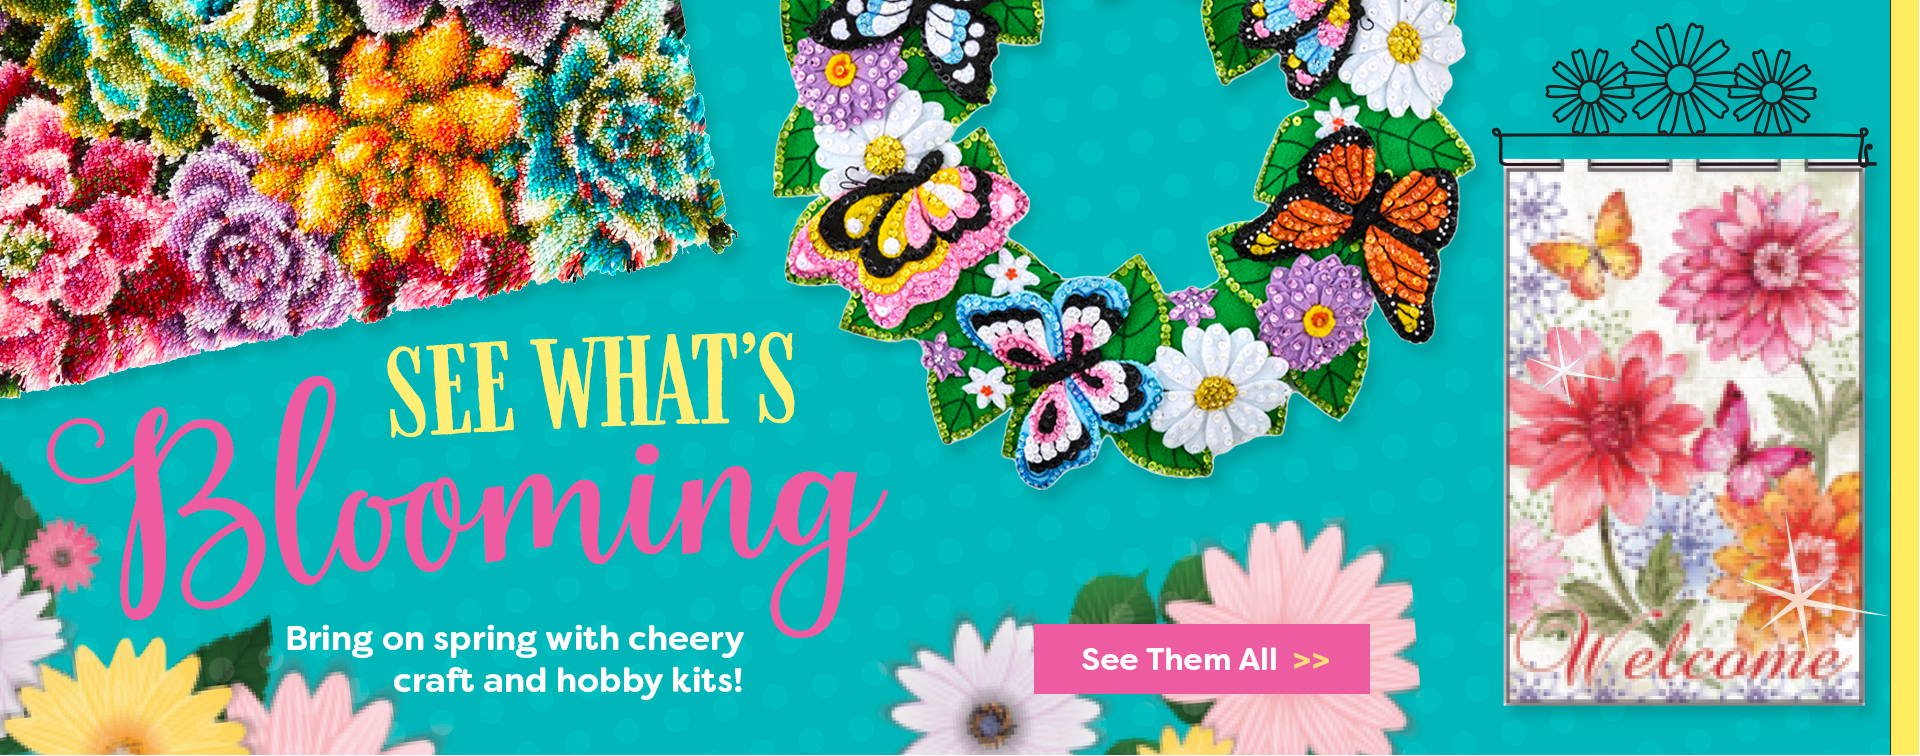 See What's Blooming. Bring on spring with cheery craft and hobby kits. See them all >>